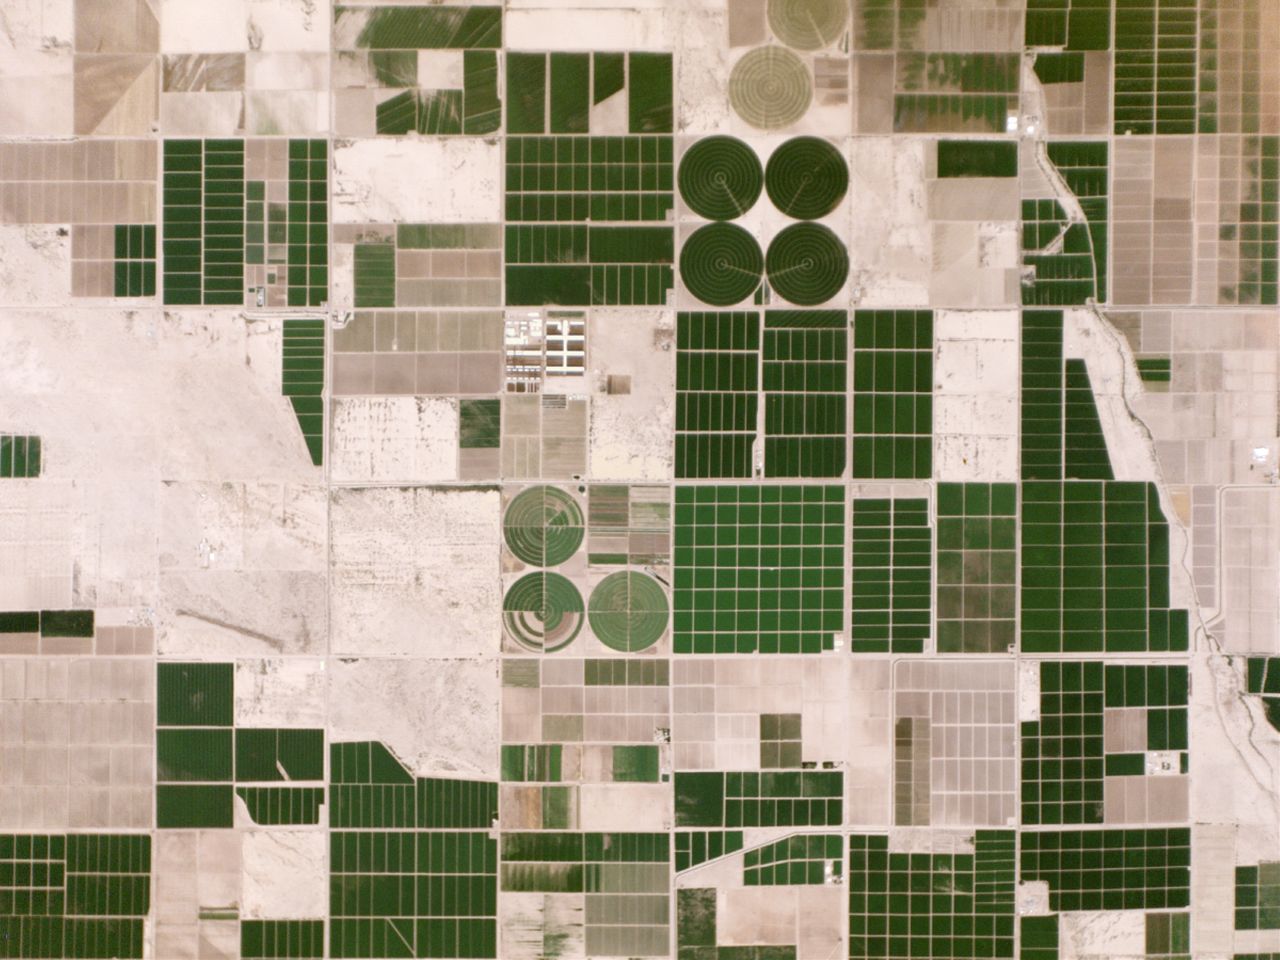 Irrigated fields in Pinal County, Arizona.